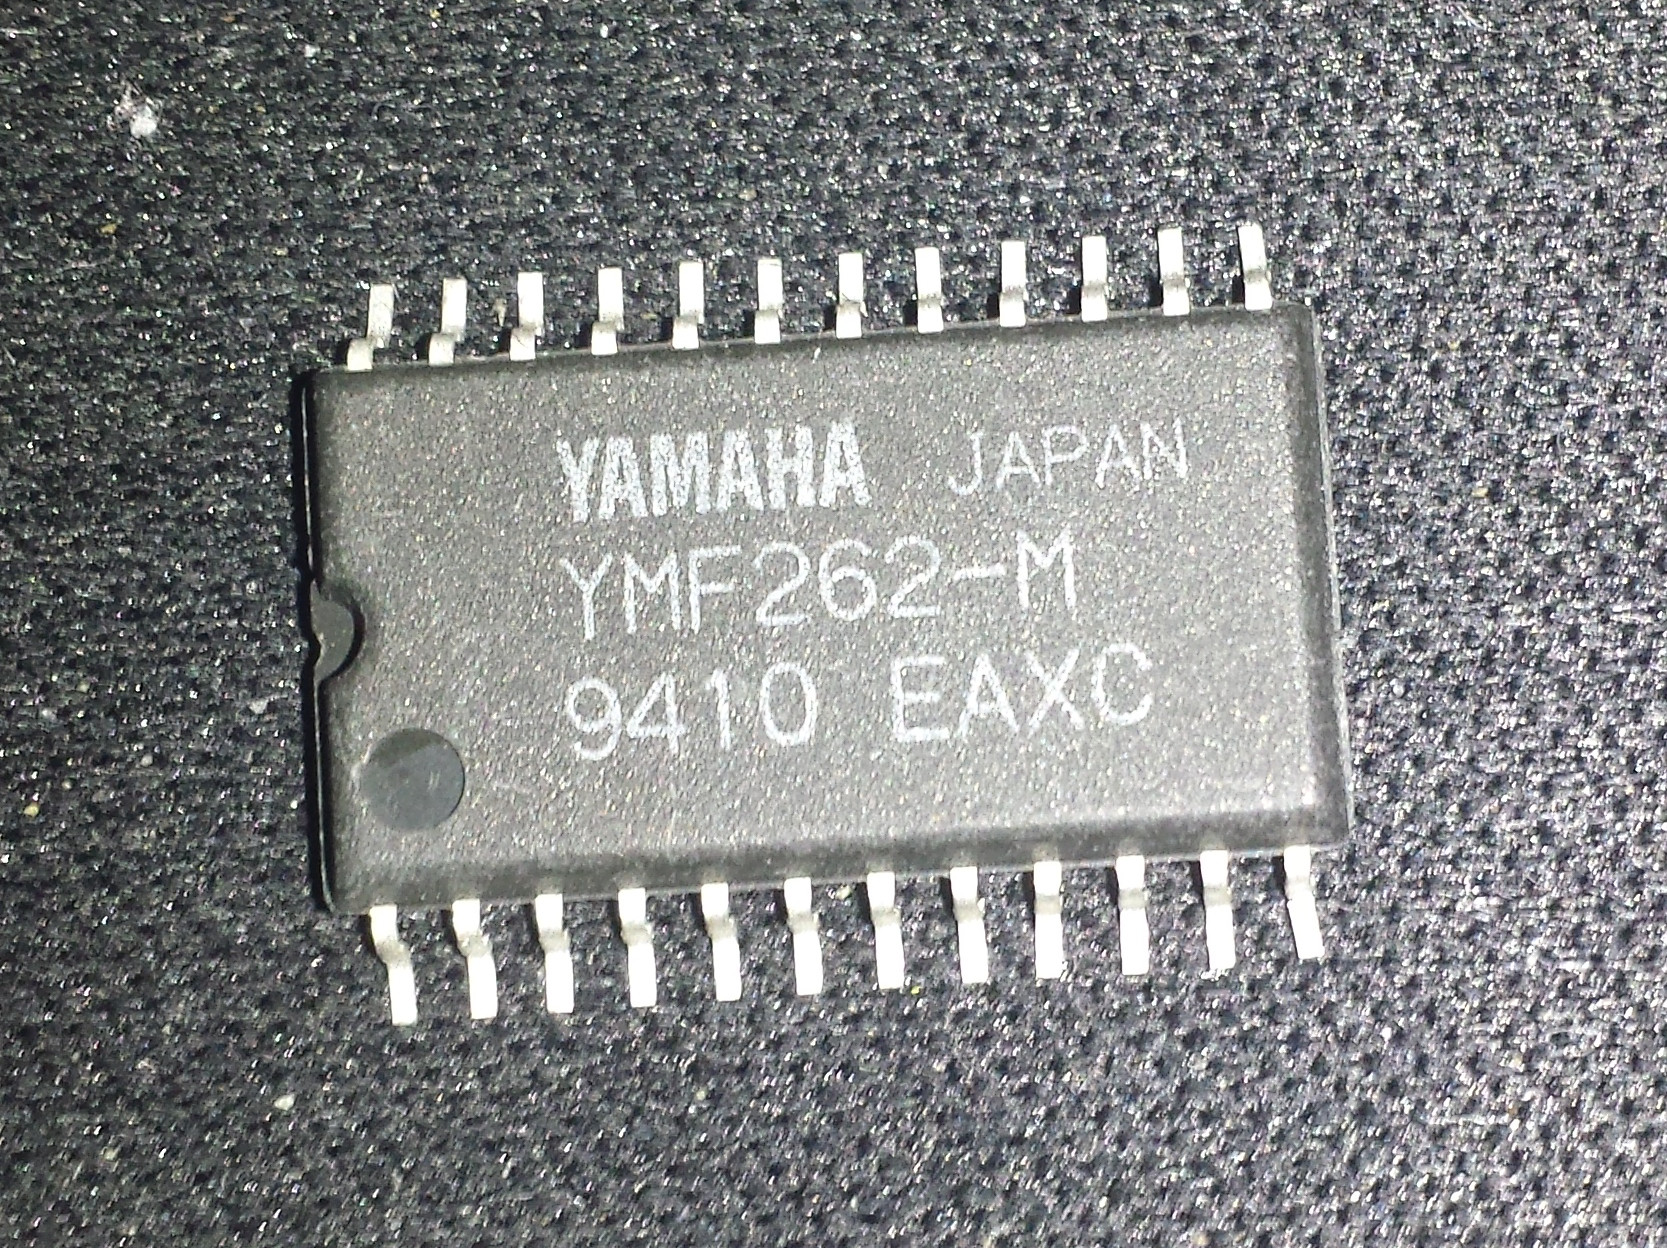 The YMF262